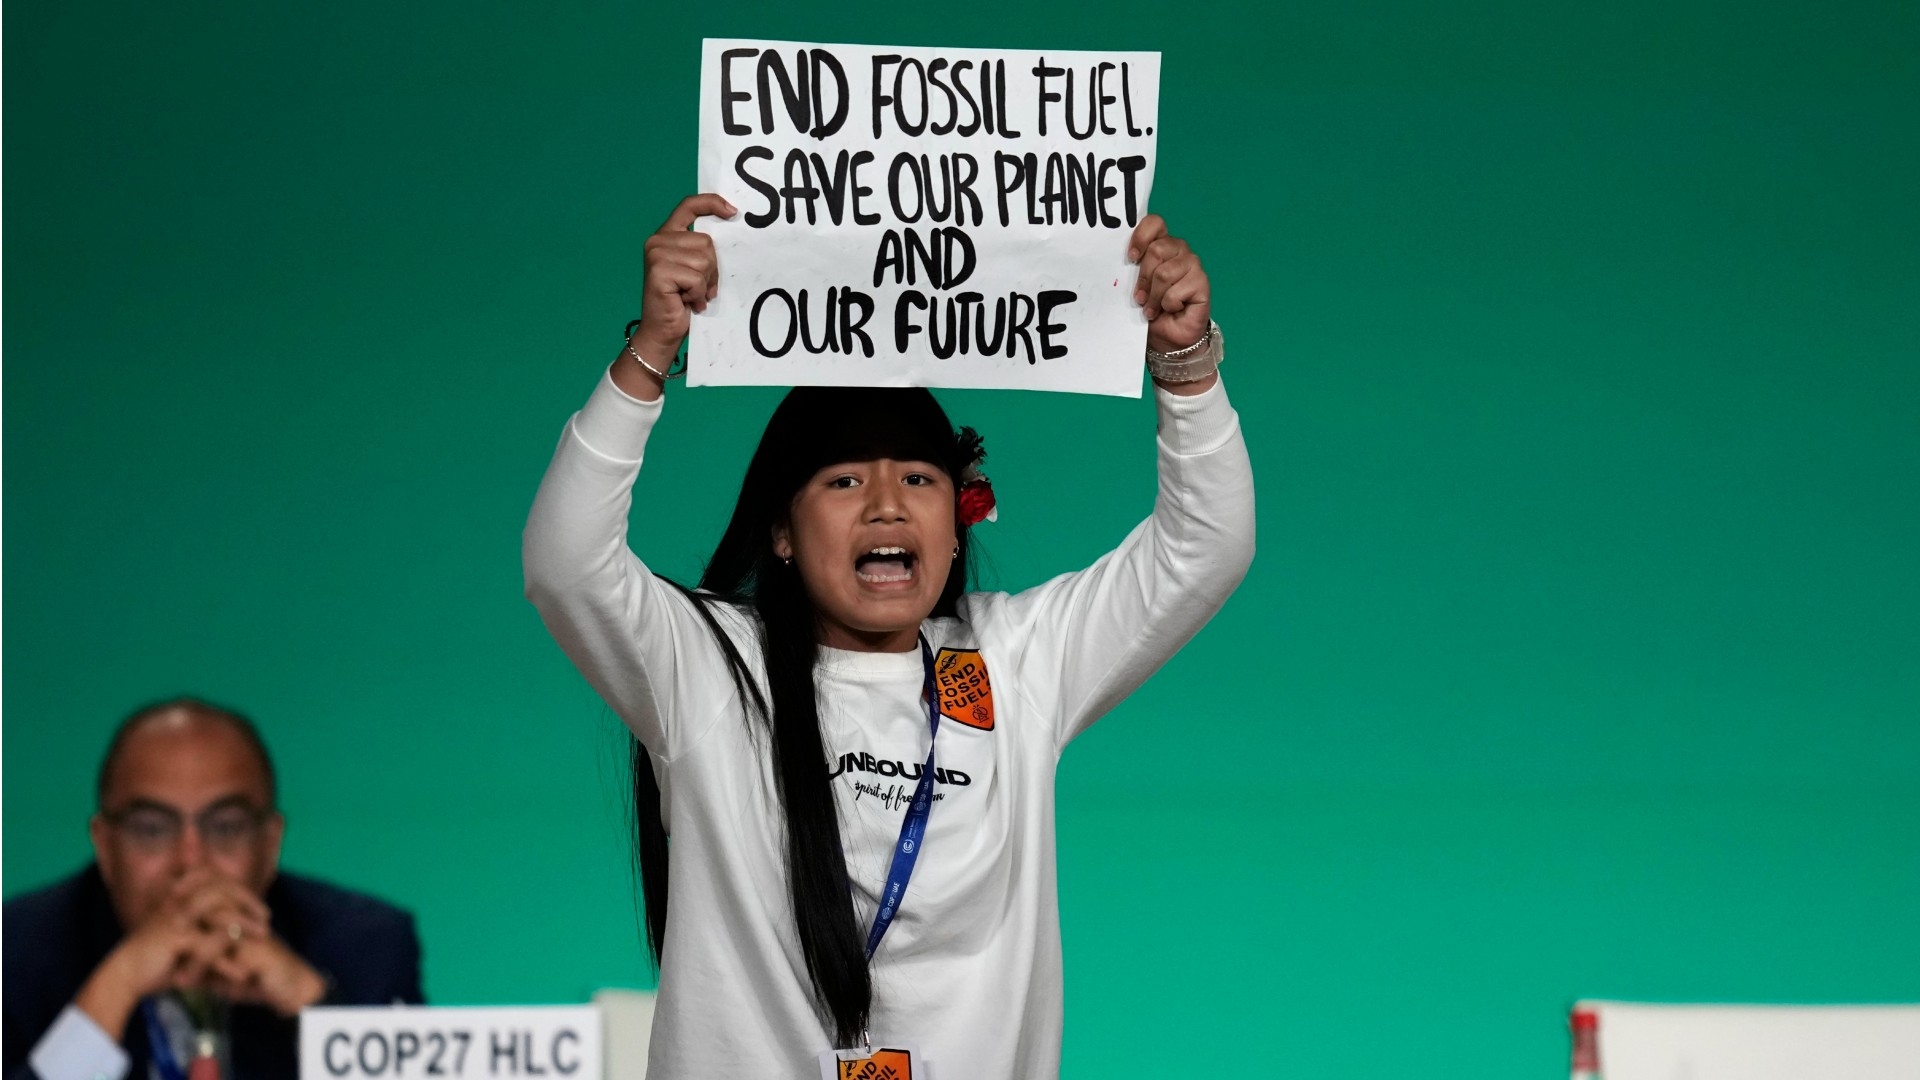 Licypriya Kangujam protests against the use of fossil fuels during an event at the COP28 U.N. Climate Summit, Monday, 11 December 2023, in Dubai, United Arab Emirates (AP)